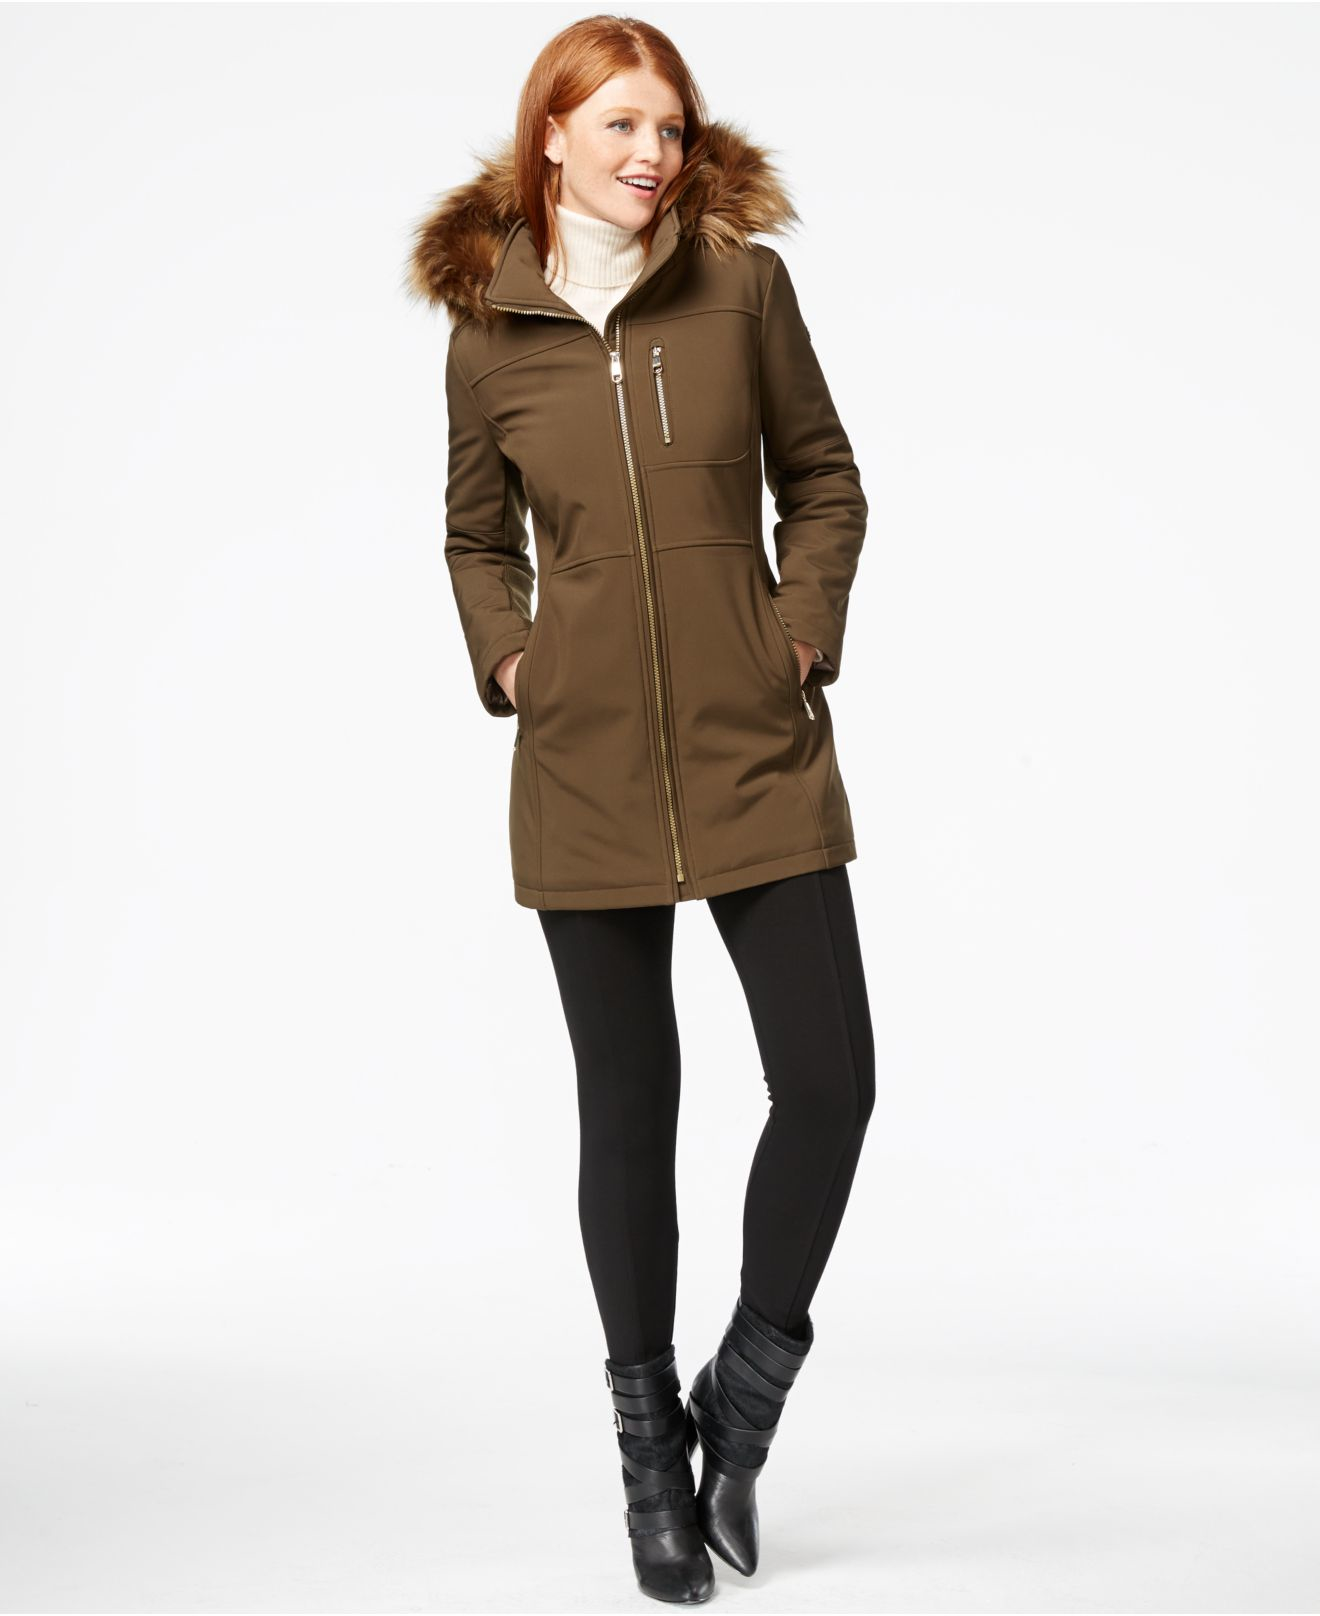 Lyst - Calvin Klein Faux-fur-trim Hooded Softshell Jacket in Natural